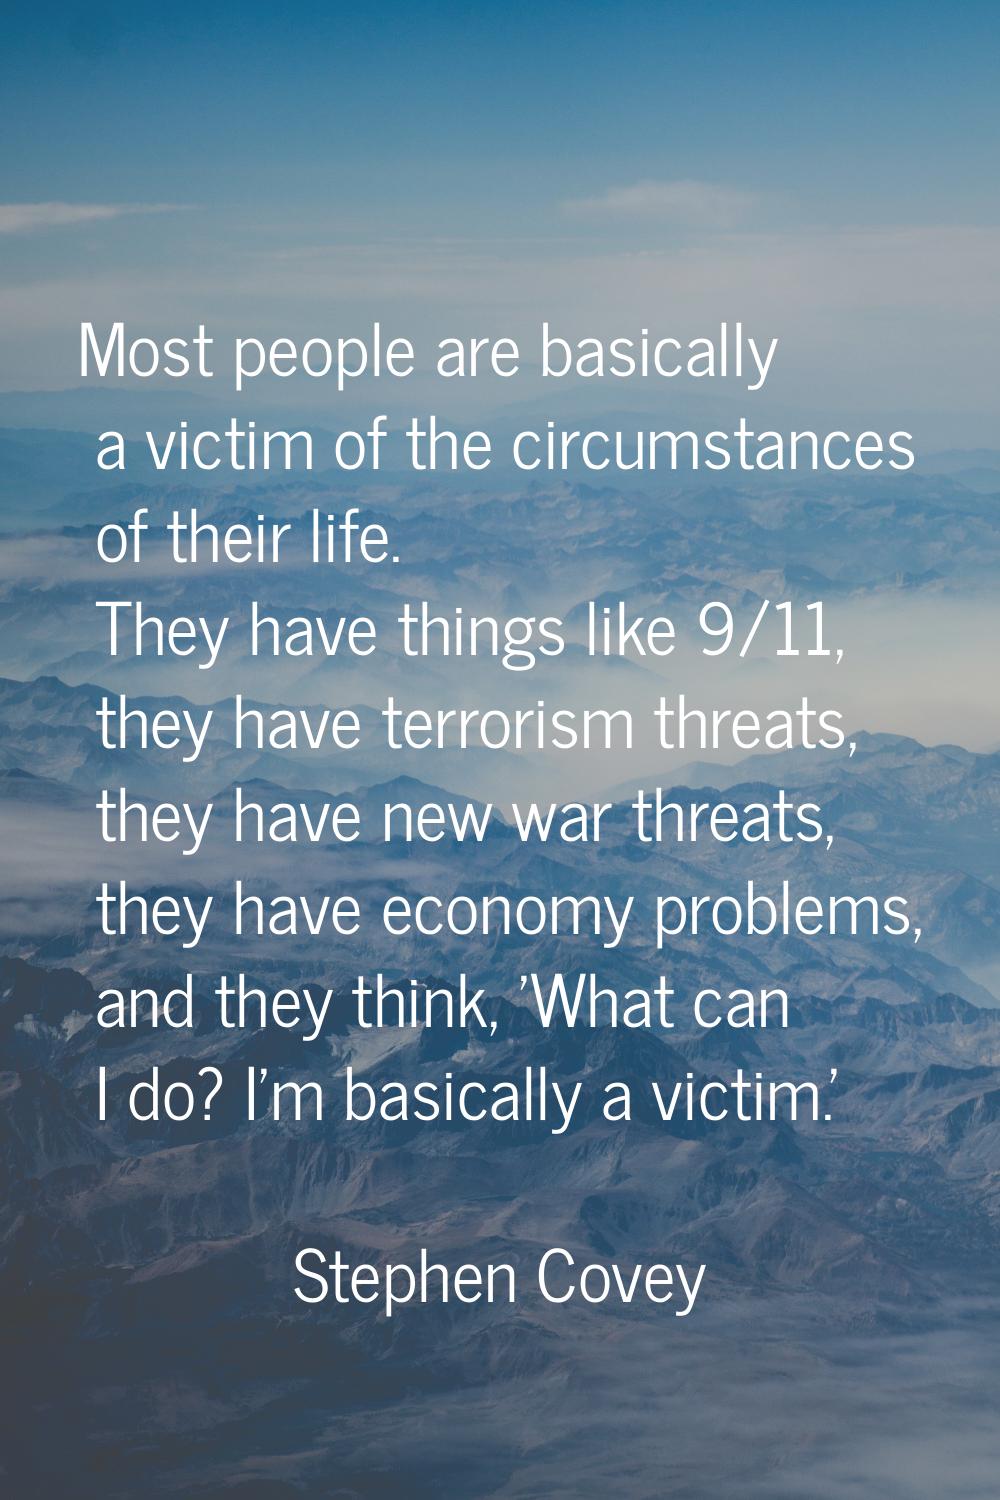 Most people are basically a victim of the circumstances of their life. They have things like 9/11, 